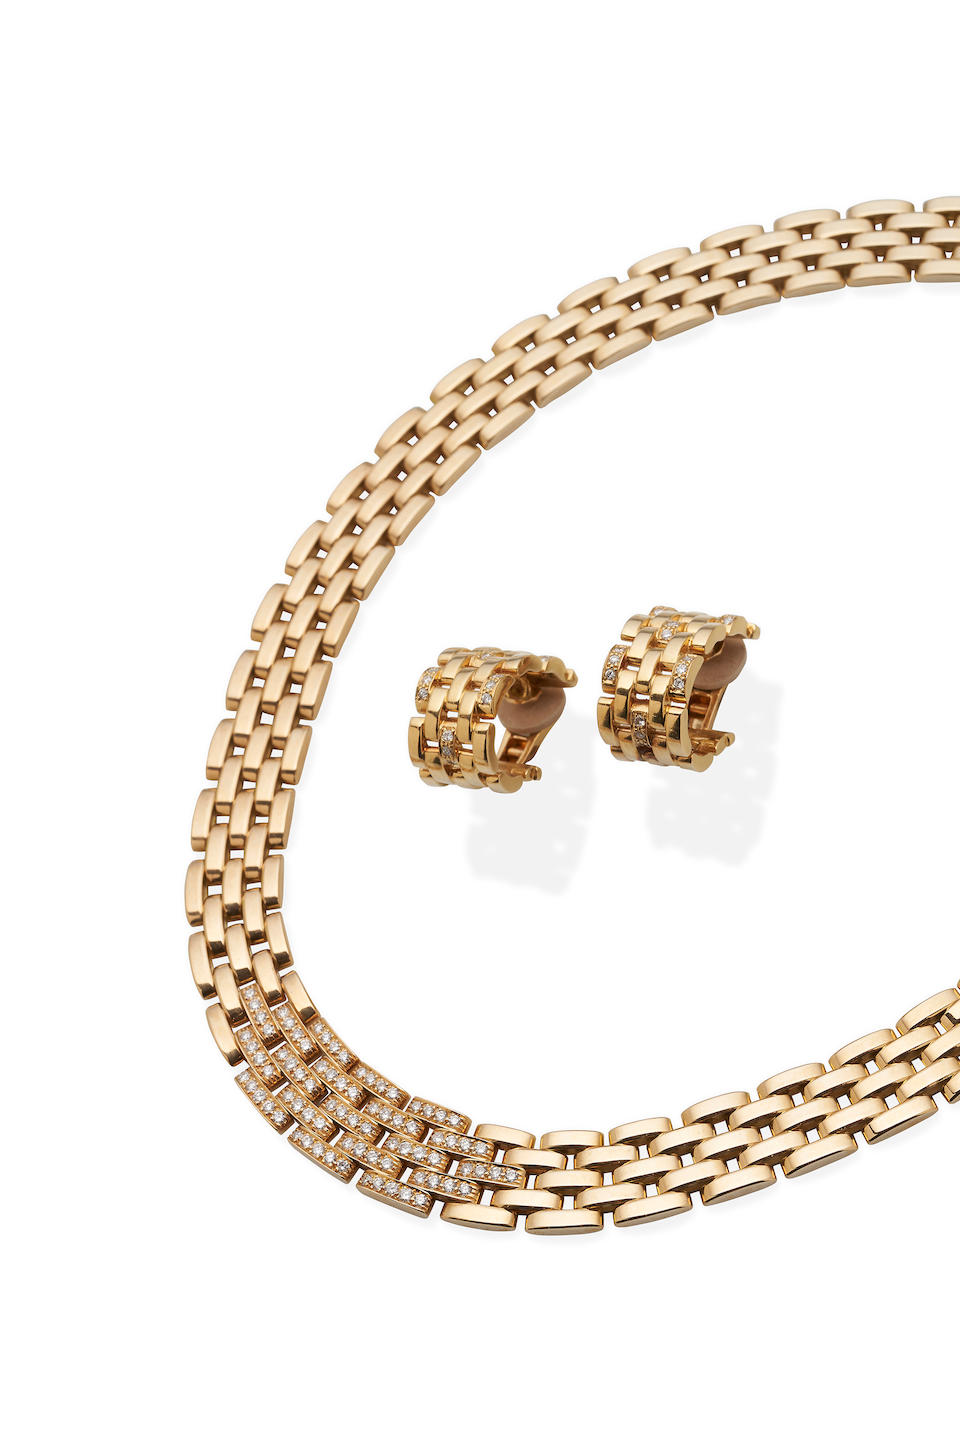 CARTIER | A GOLD AND DIAMOND 'MAILLON PANTH&#200;RE' SUITE